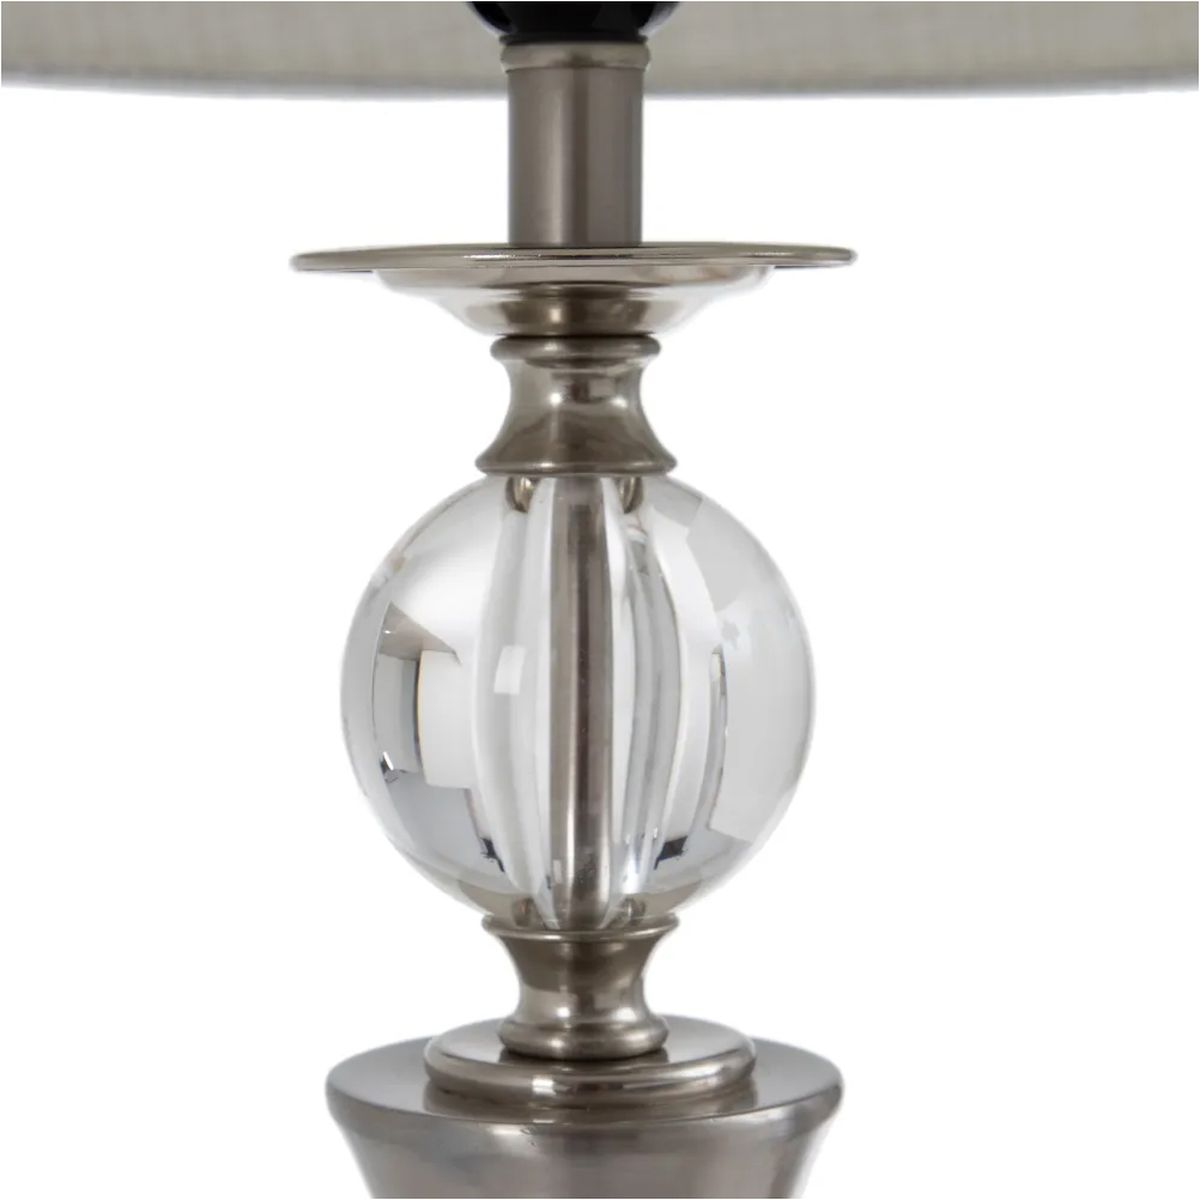 Table lamp in metal, silver color